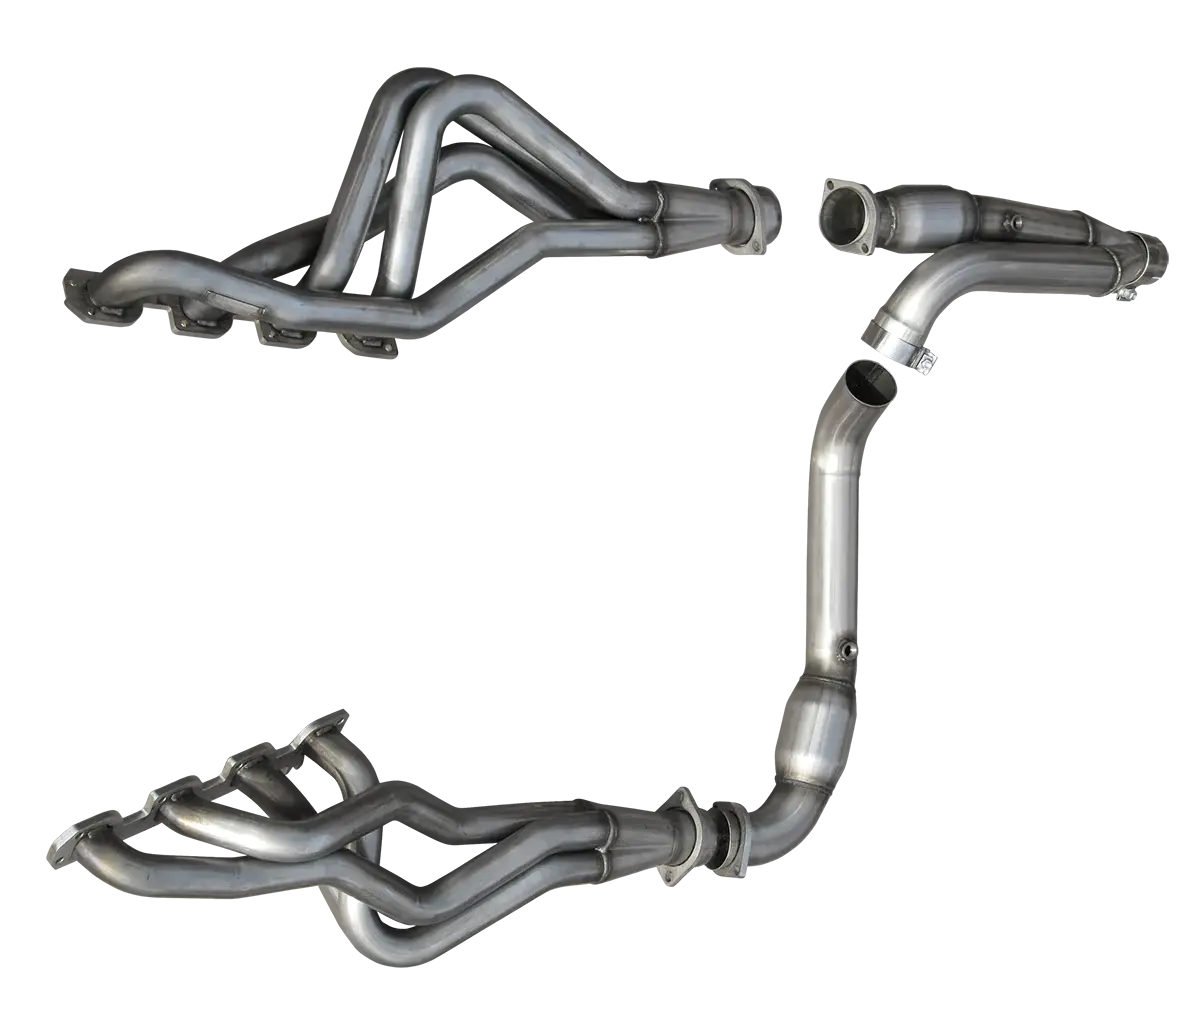 American Racing Headers - ARH Dodge Ram 1500 2006-2008 1-3/4" x 3" Long Tube Headers & Full Catted Connection Pipes With Stainless Steel Exhaust Tips (Square-Port) - Image 1